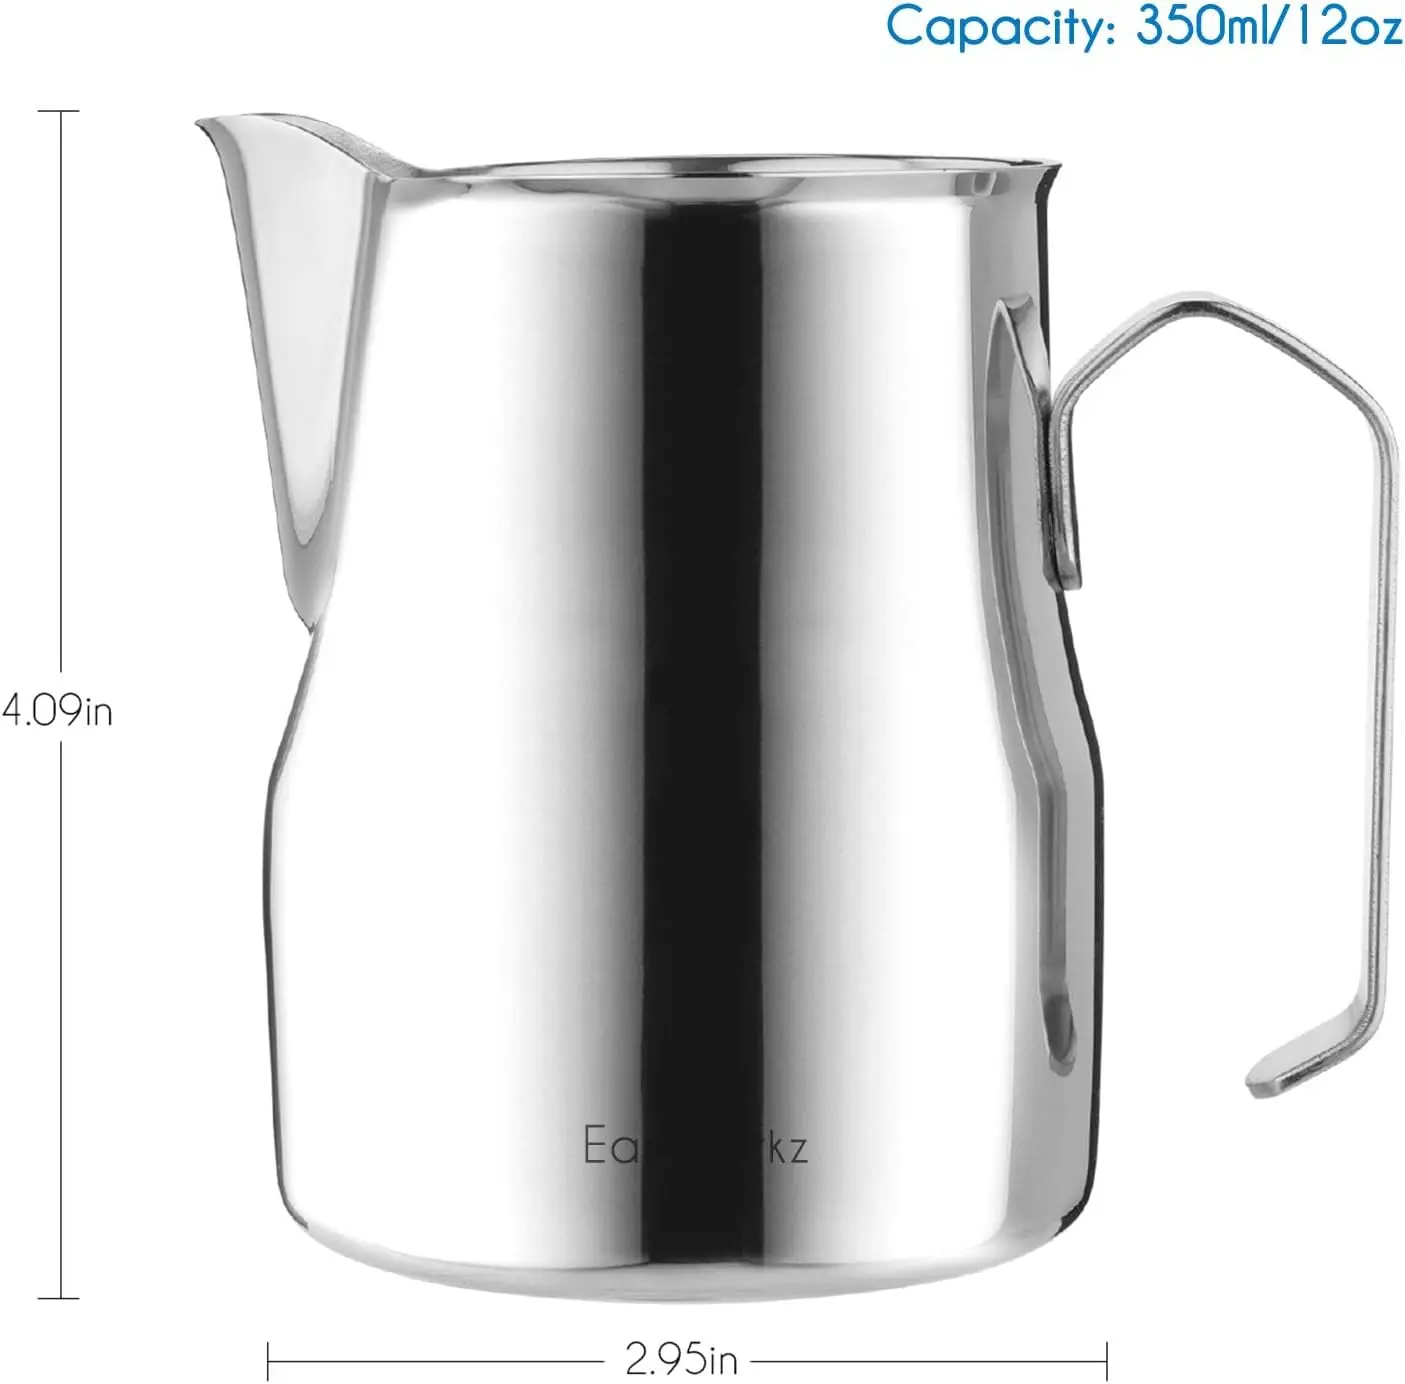 12 Oz. Frothing Milk Pitcher 